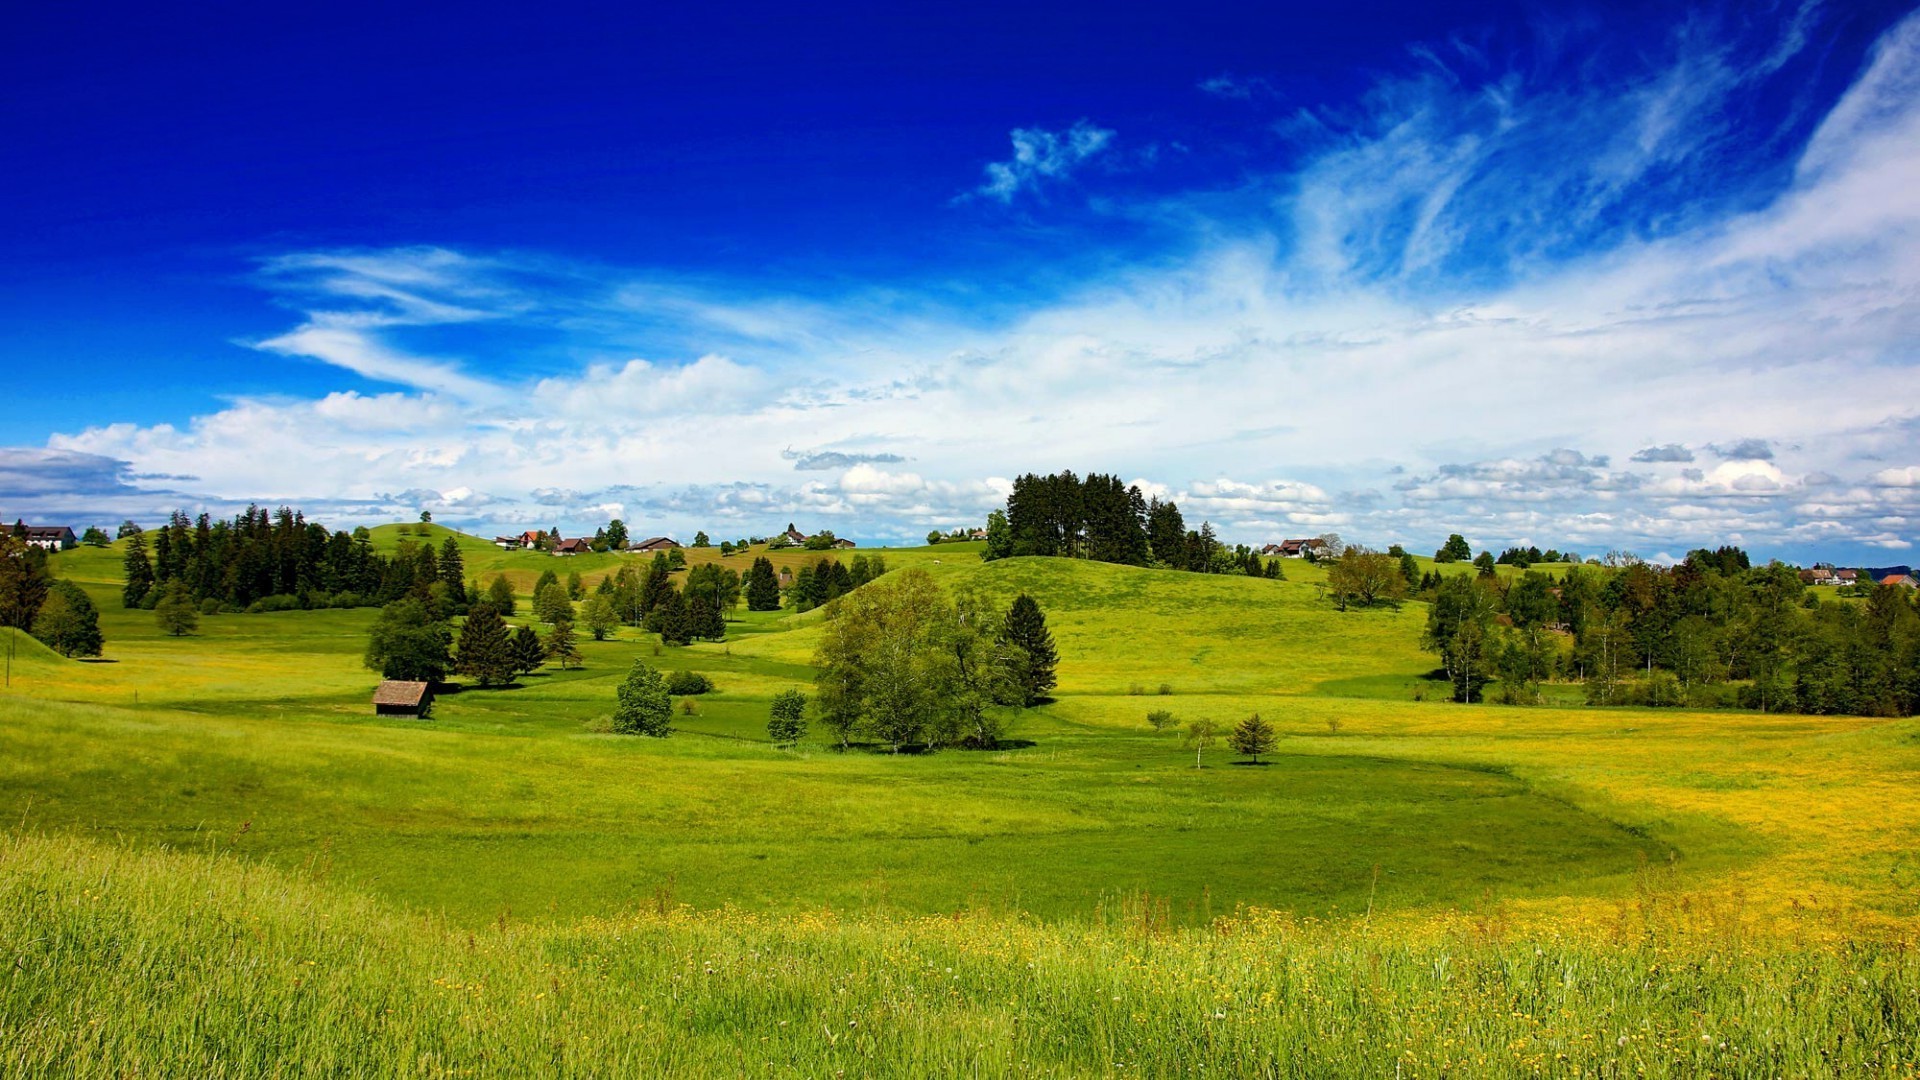 fields meadows and valleys landscape nature hayfield field agriculture tree grass countryside rural sky summer pasture outdoors farm country hill grassland scenic idyllic